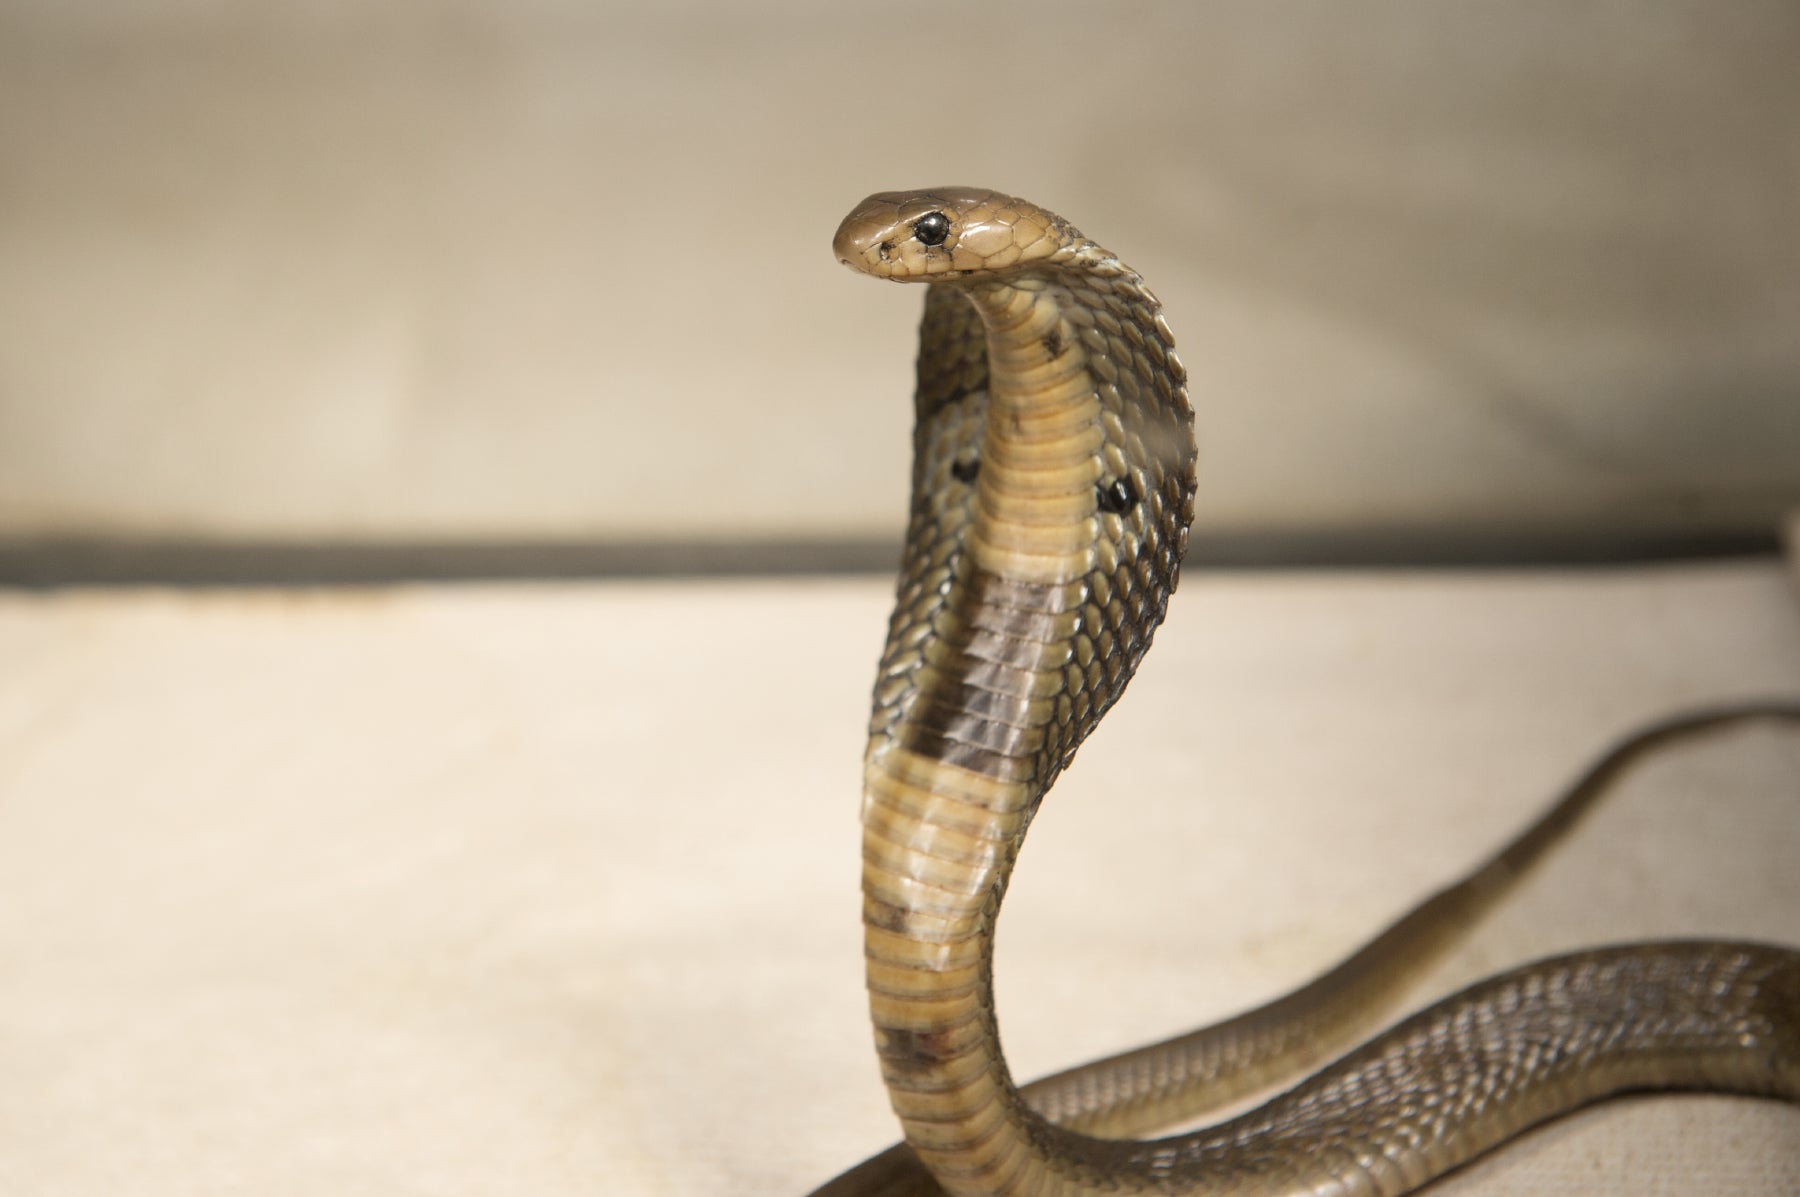 New species of cobra-like snake discovered – but it may already be extinct